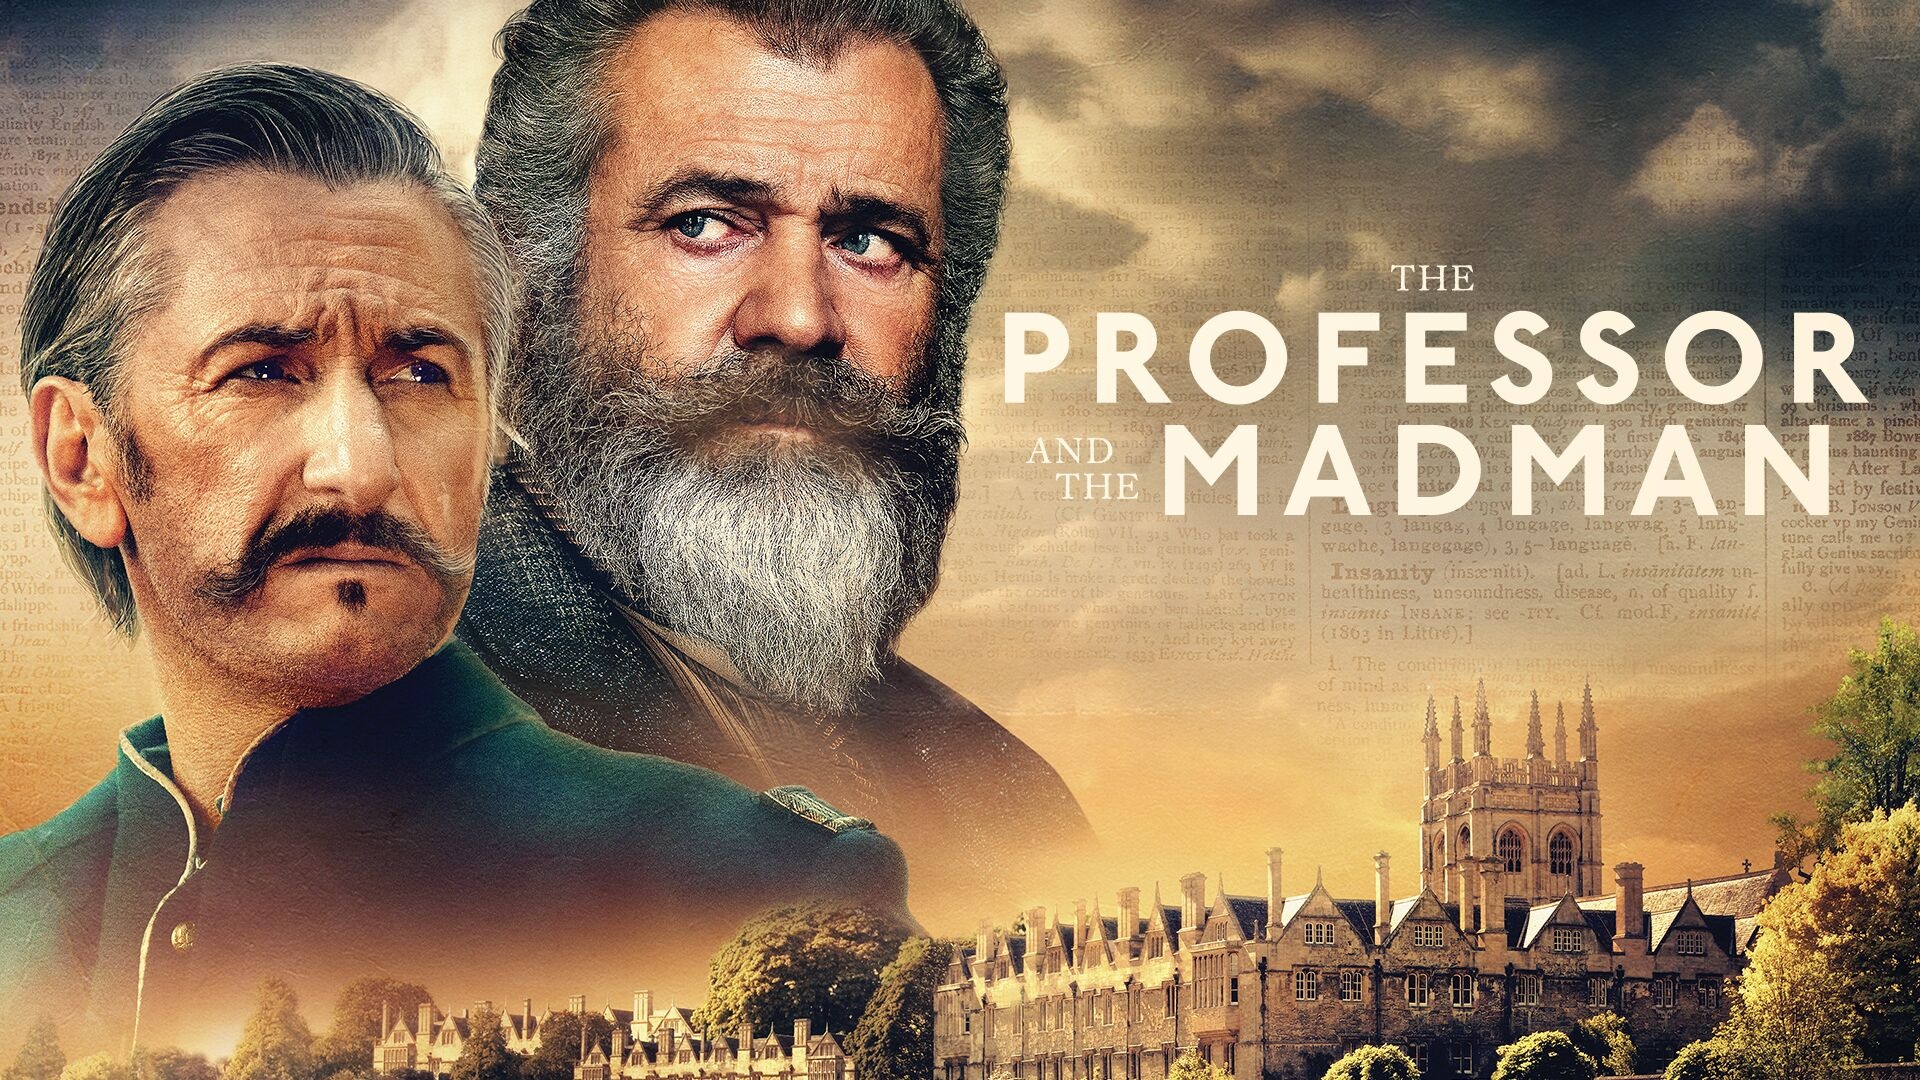 HD wallpaper, The Professor And The Madman, Desktop Full Hd The Professor And The Madman 2019 Wallpaper, 1920X1080 Full Hd Desktop, The Professor And The Madman, The Professor And The, Watch The Professor